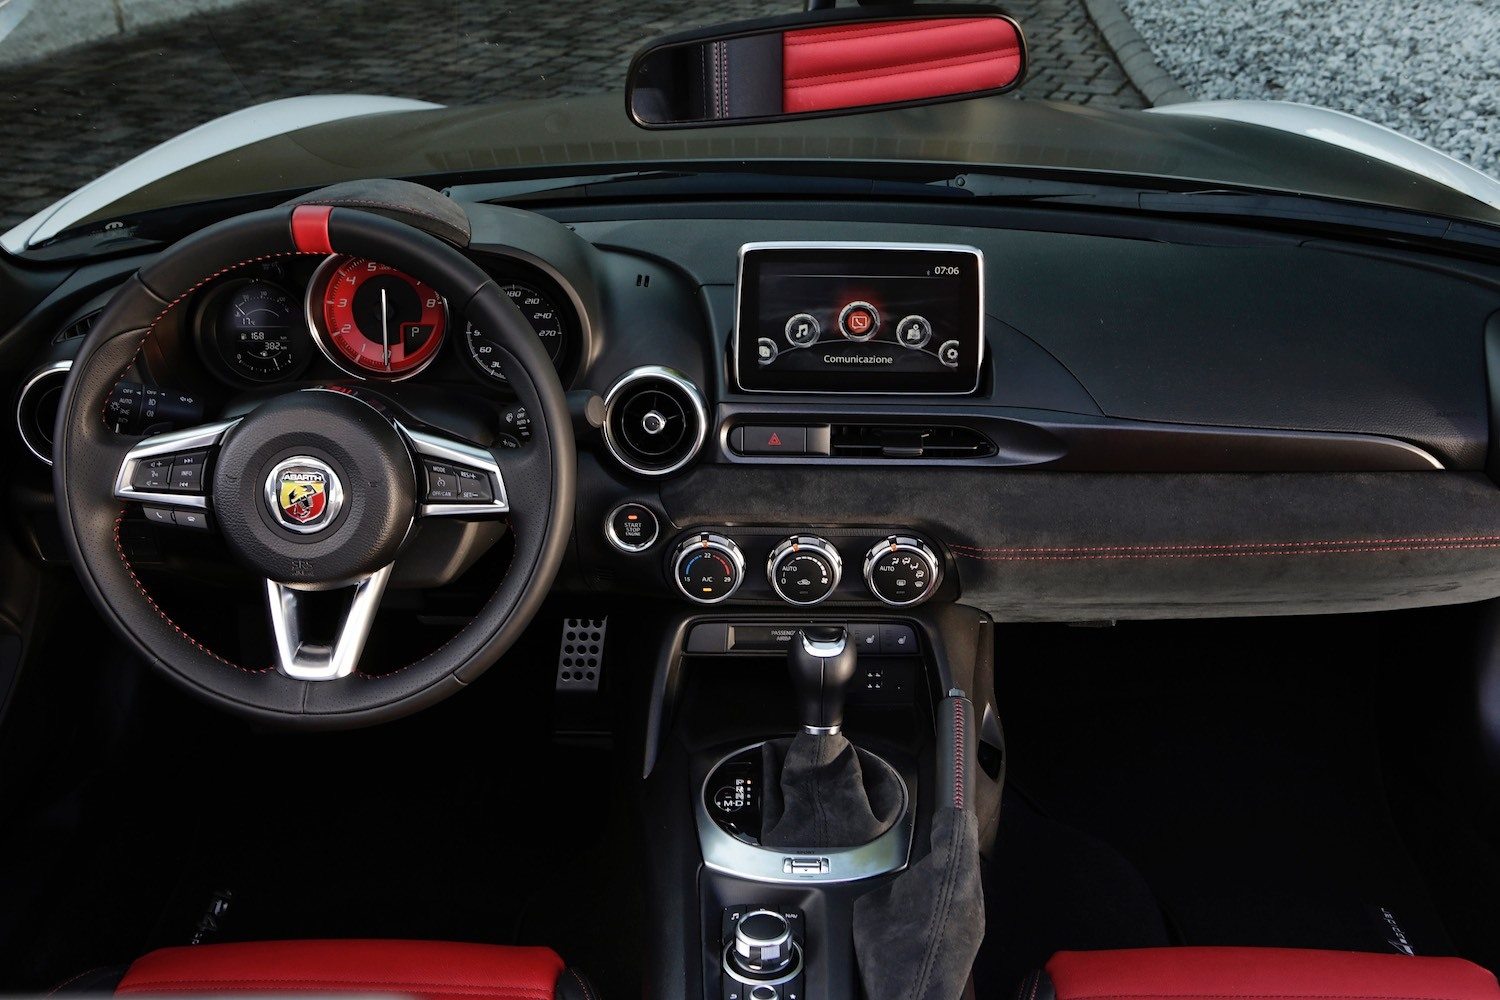 Jonathan Humphrey reviews the Abarth 124 Spider for Drive 18